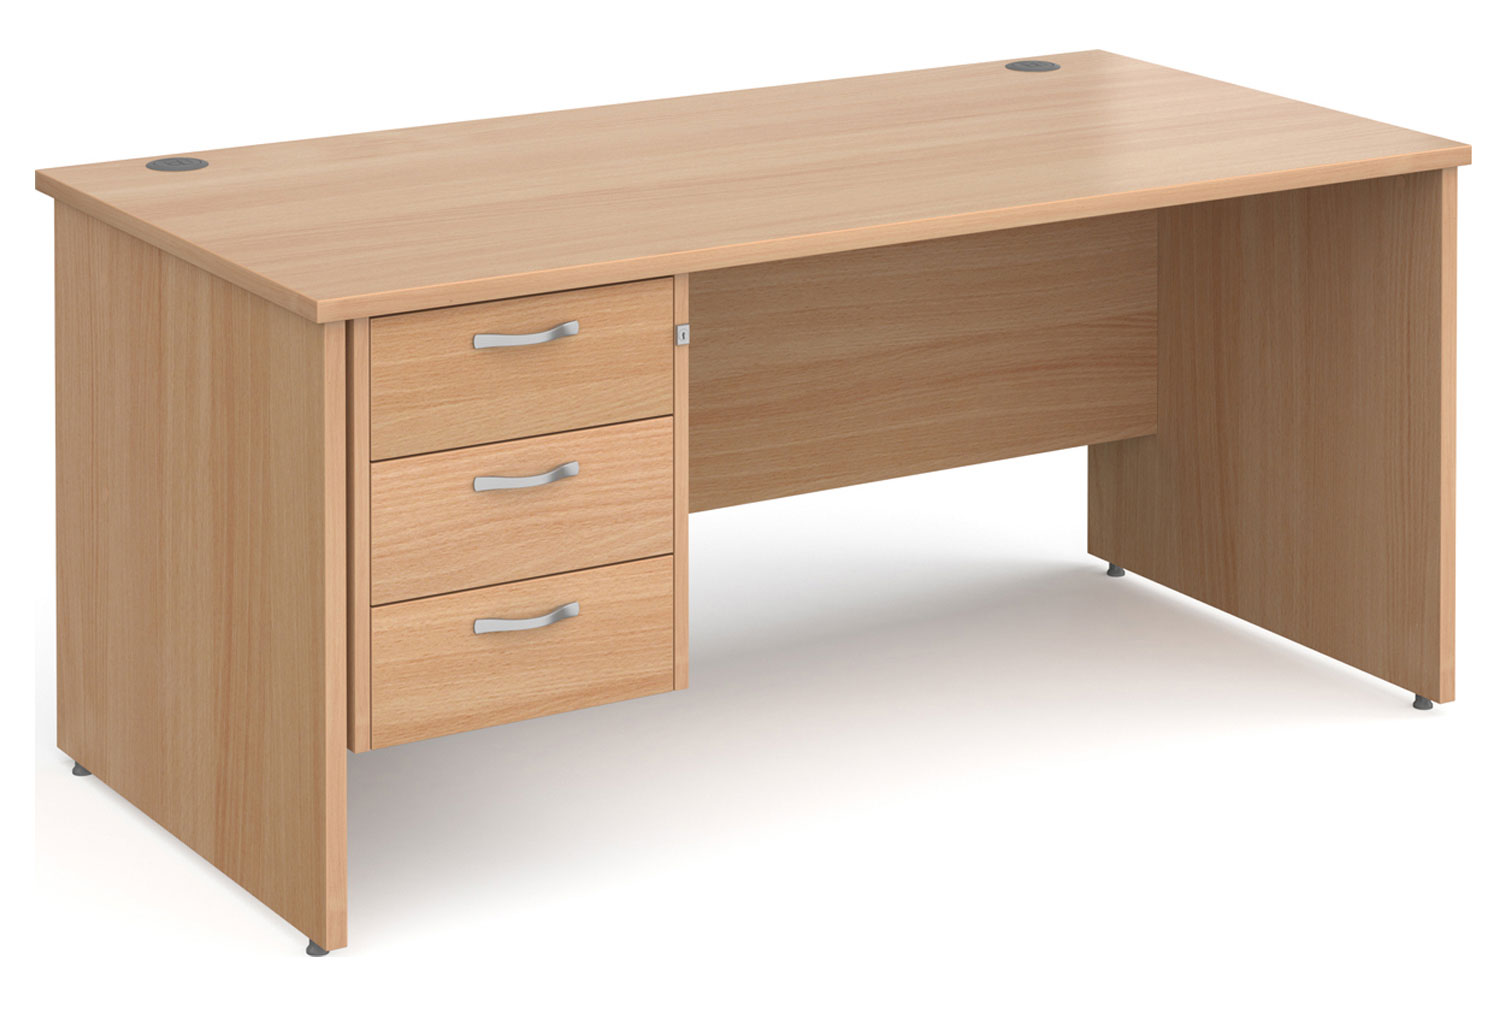 Tully Panel End Rectangular Office Desk 3 Drawers, 160wx80dx73h (cm), Beech, Fully Installed